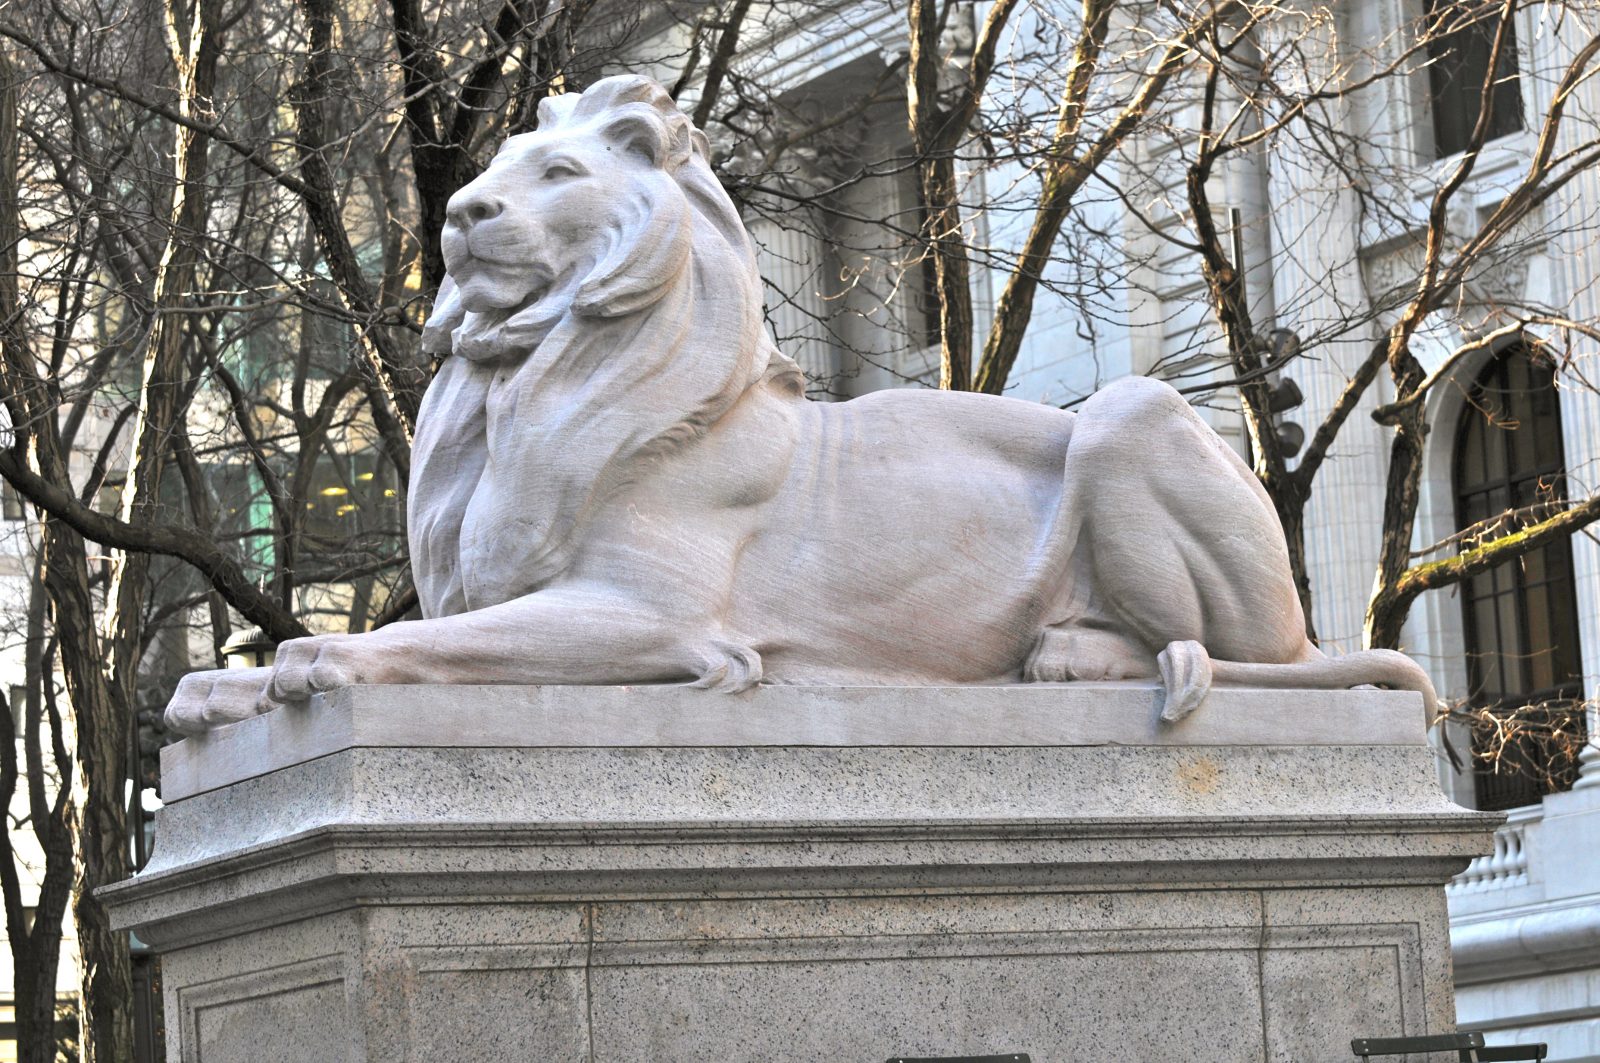 No One Has Got a Perfect Score on This General Knowledge Quiz Without Cheating New_York_Public_Library_Lion